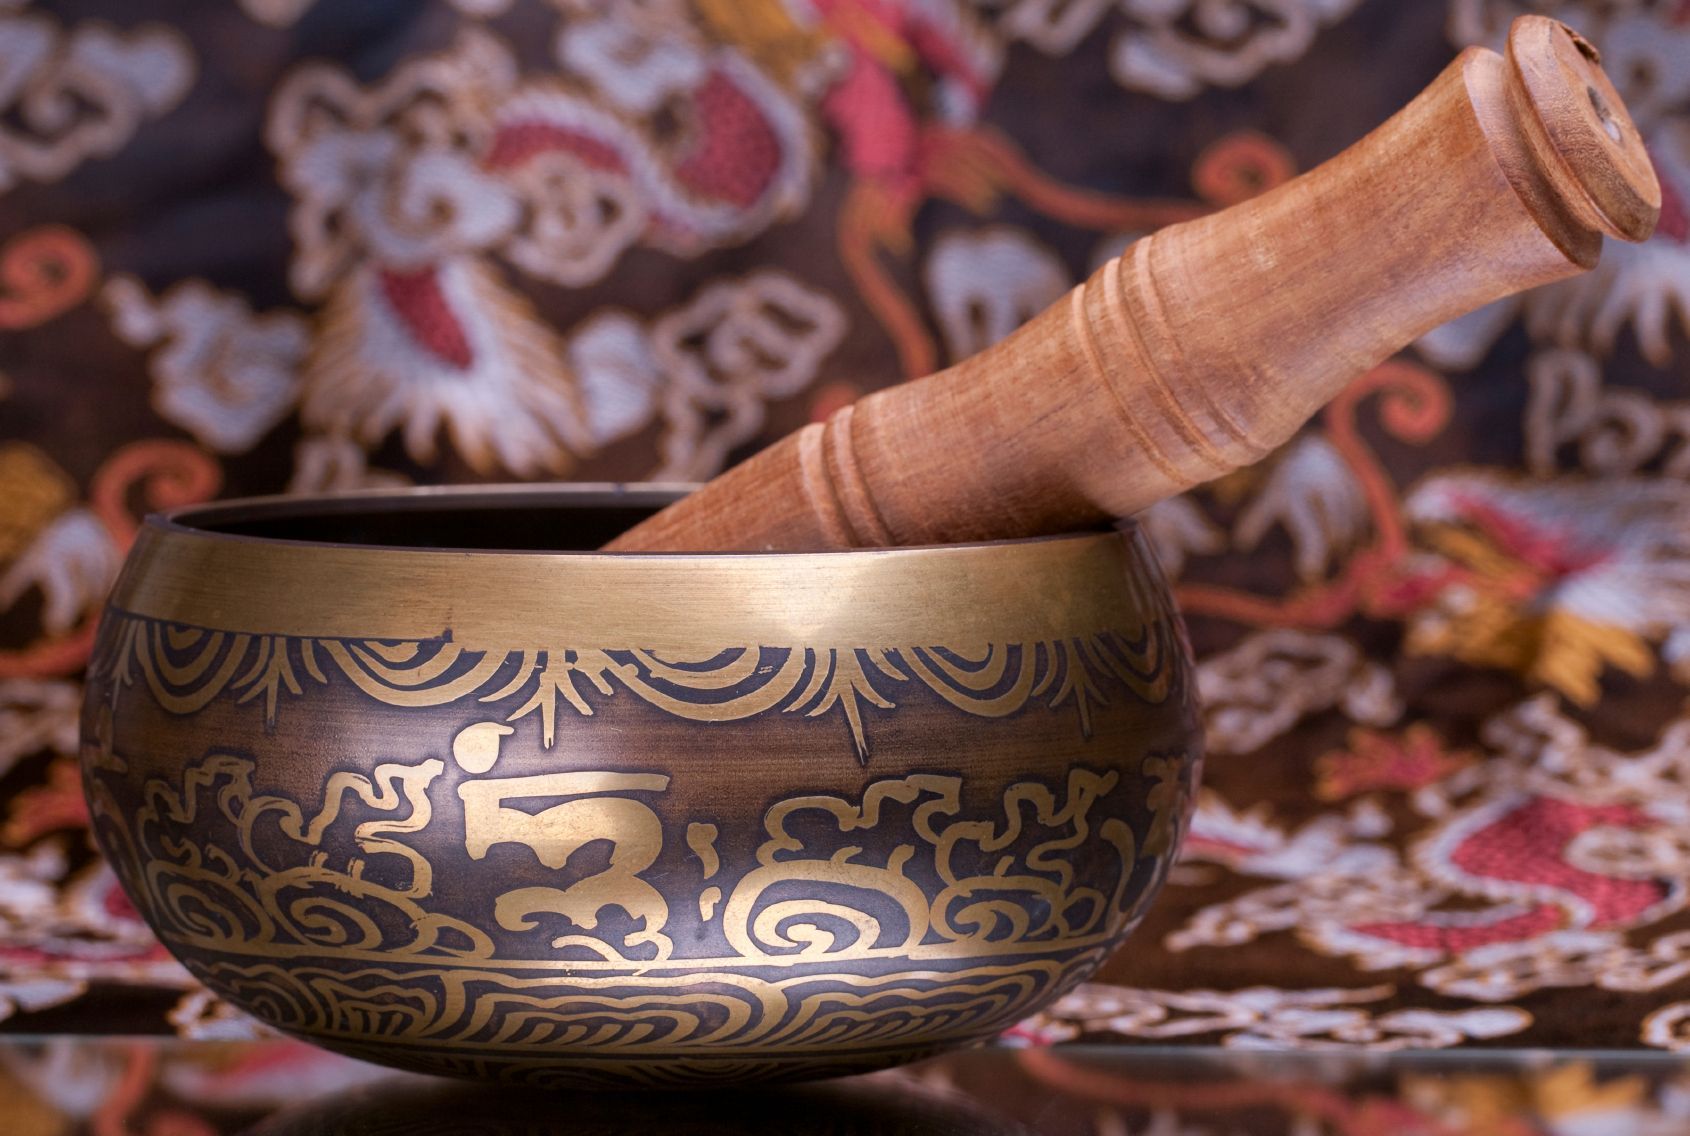 A brass bowl with a wooden stick in it is sitting on a table.